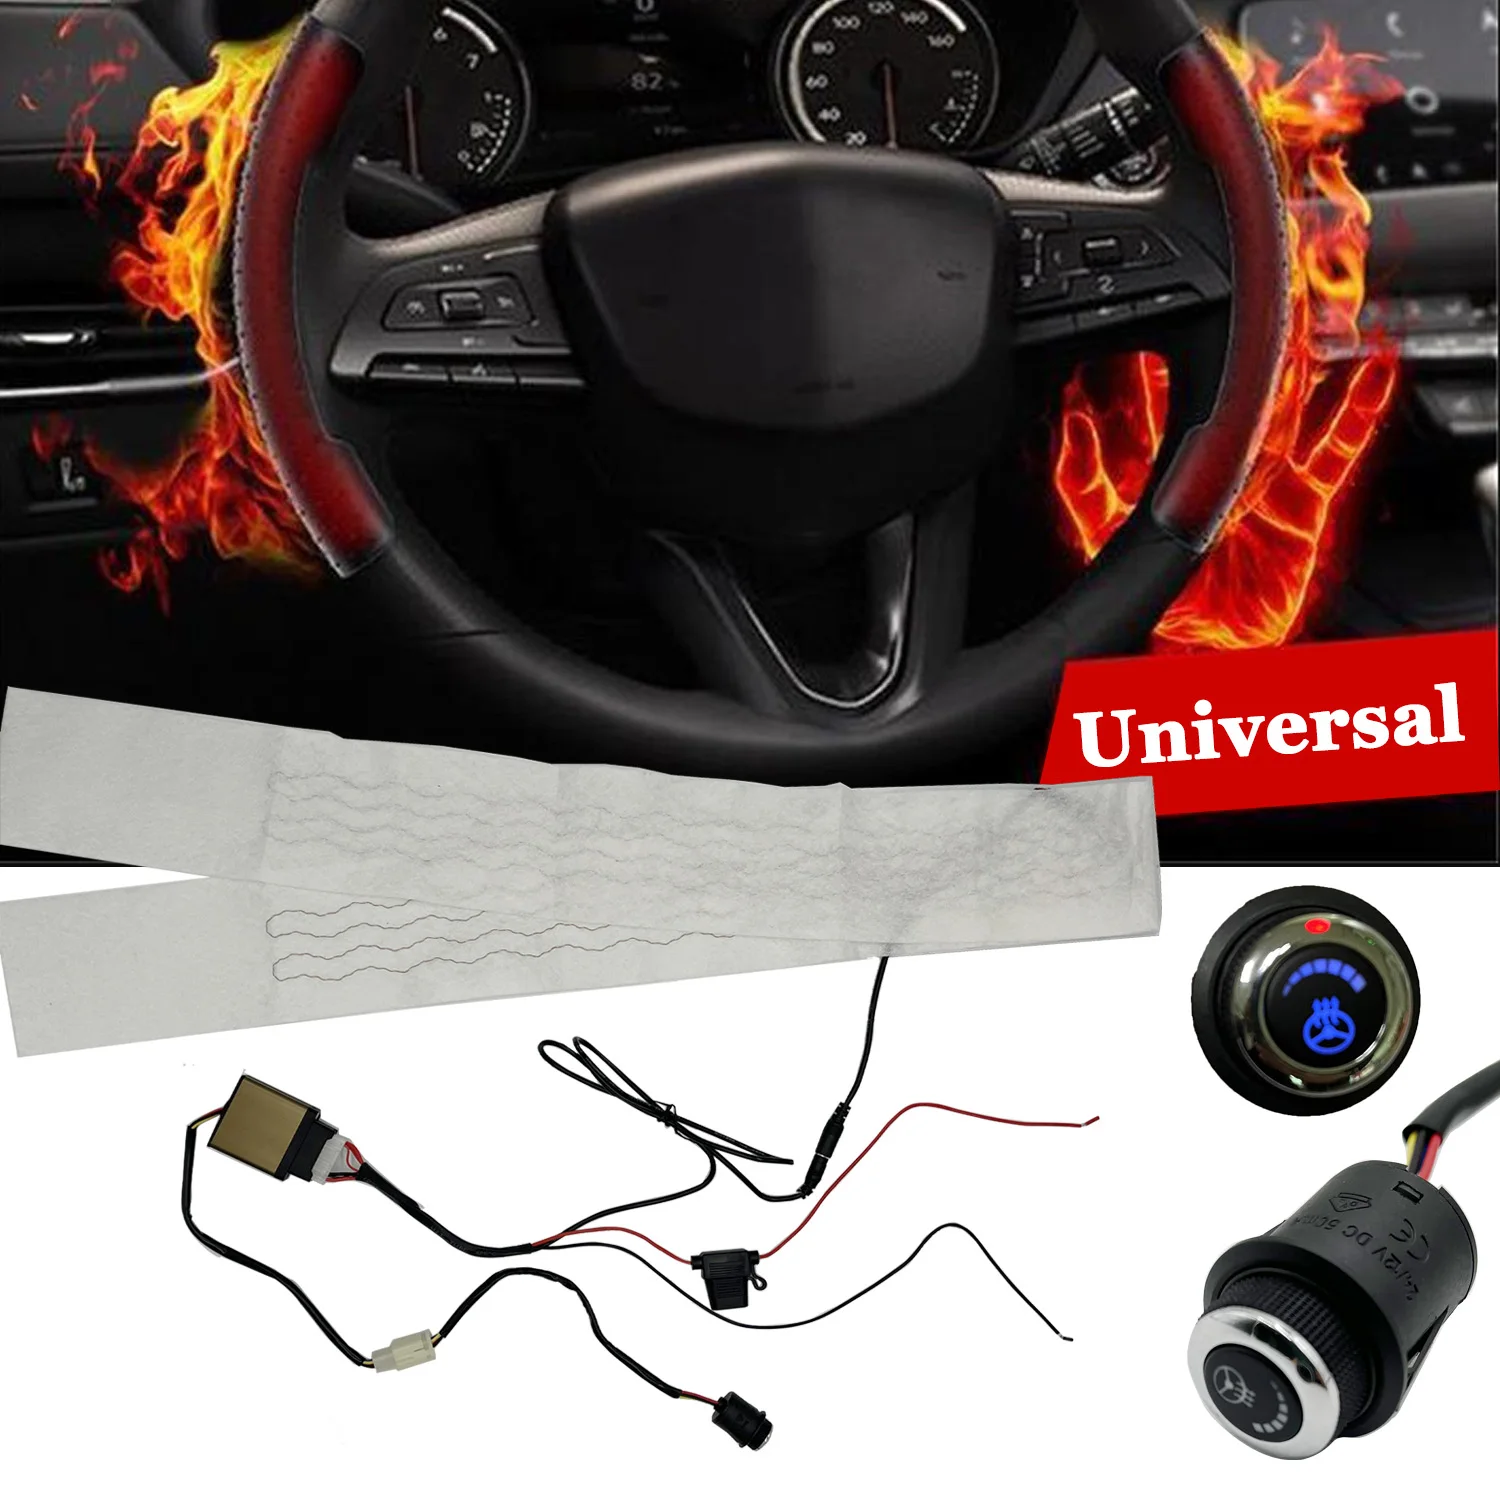 

Built-in Car Steering Wheel Heater Kit Universal 12V Carbon Fiber Heat Pads Independent Switch Control System with Harness